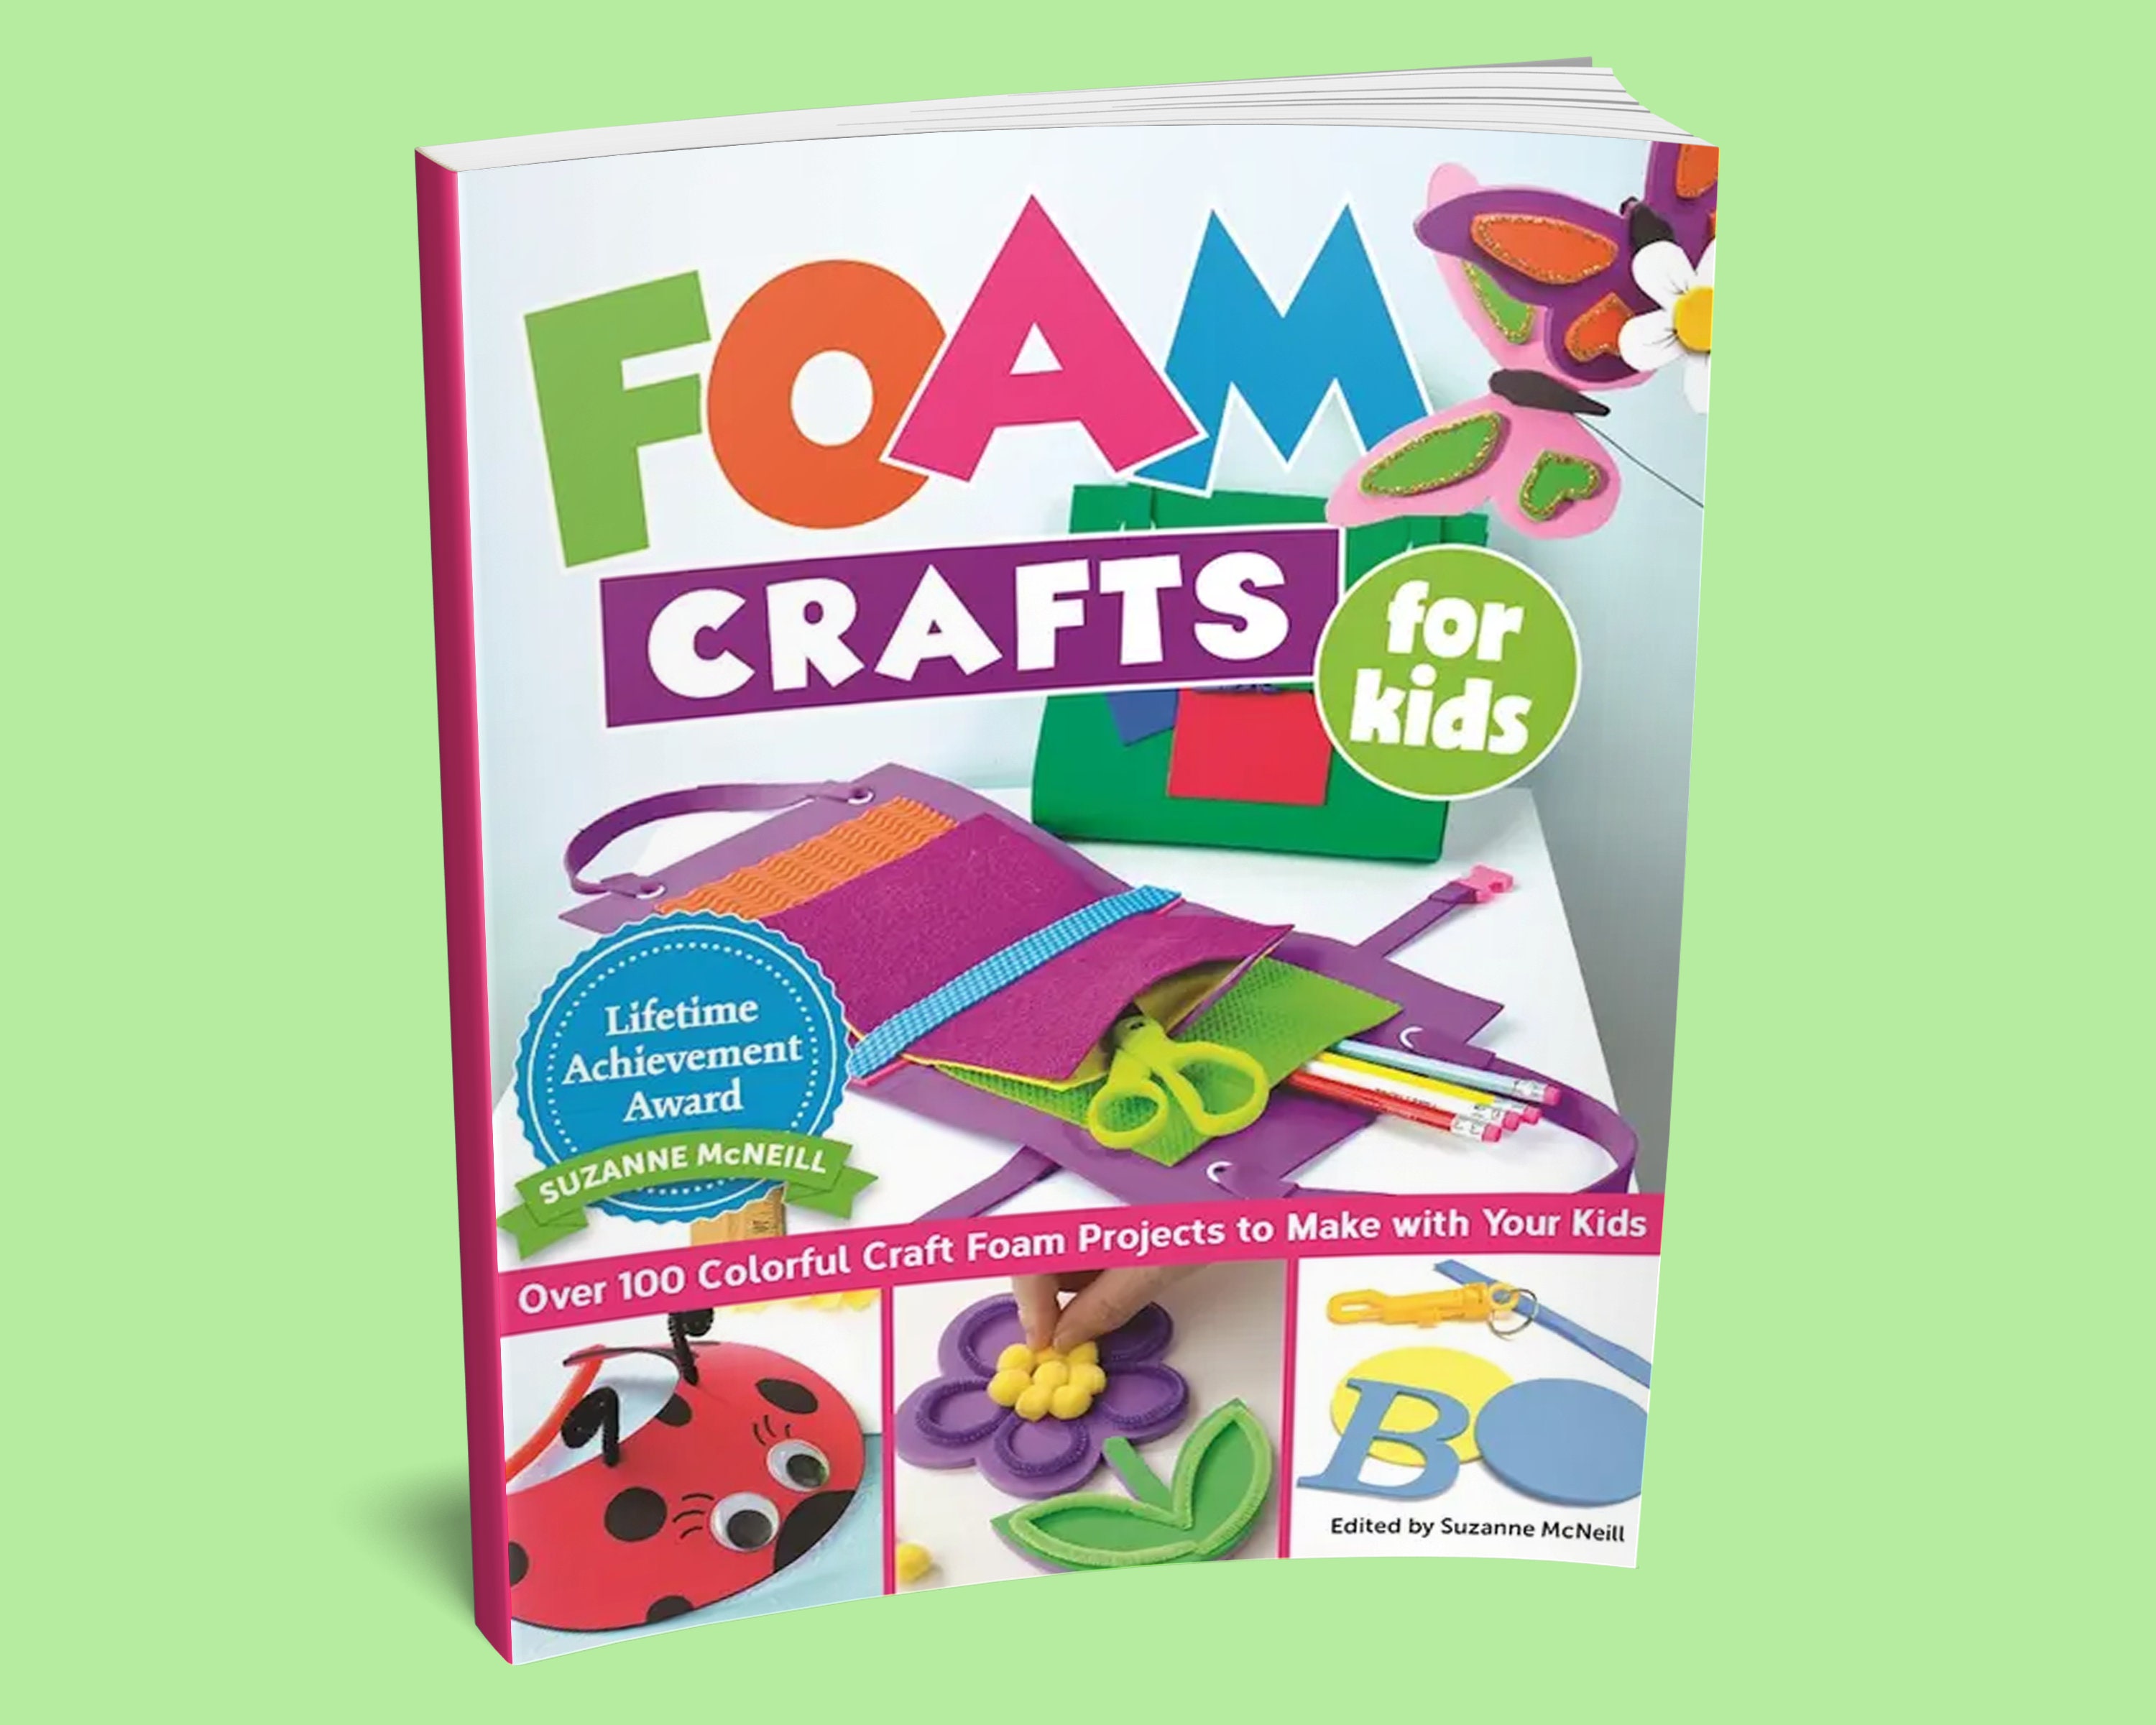 Foam Crafts for Kids: Over 100 Colorful Craft Foam Projects to Make with Your Kids [Book]